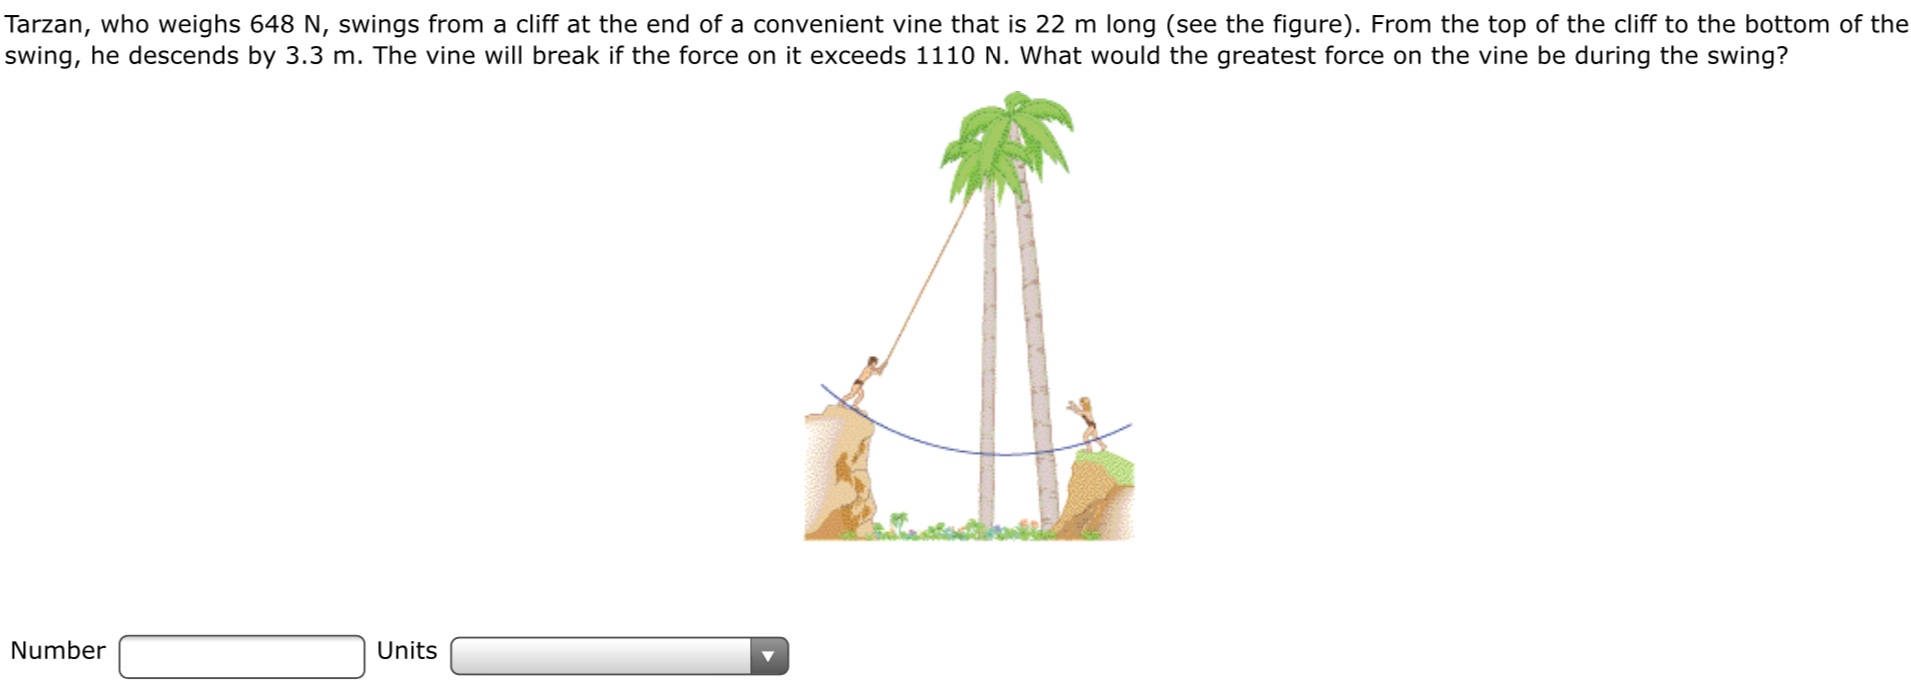 Tarzan, who weighs 648 N, swings from a cliff at the end of a convenient vine that is 22 m long (see the figure). From the top of the cliff to the bottom of the
swing, he descends by 3.3 m. The vine will break if the force on it exceeds 1110 N. What would the greatest force on the vine be during the swing?
Number
Units
